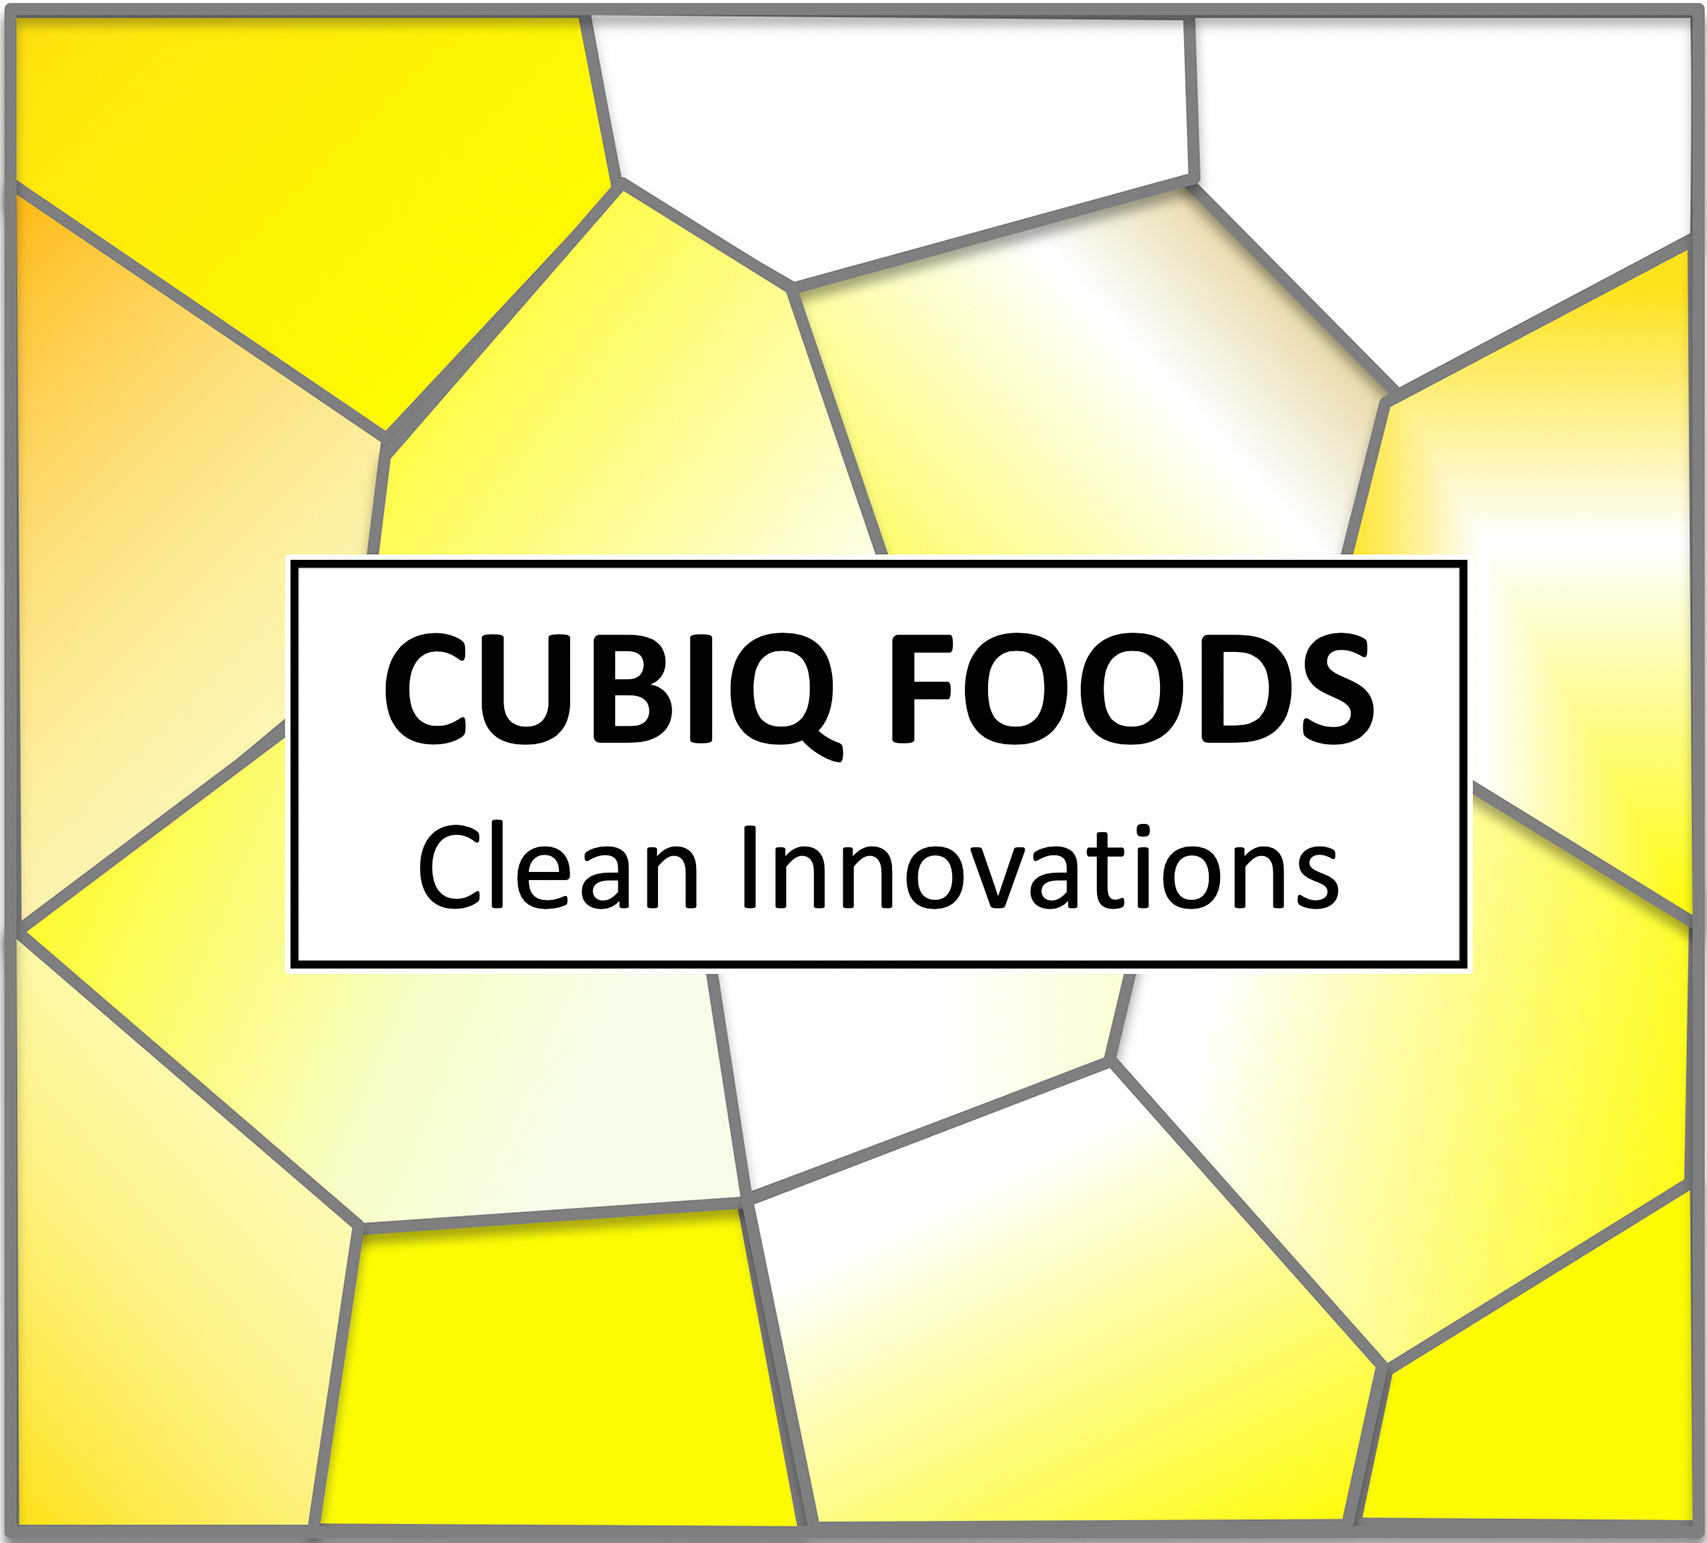 Cubiq Foods, Wednesday, January 23, 2019, Press release picture